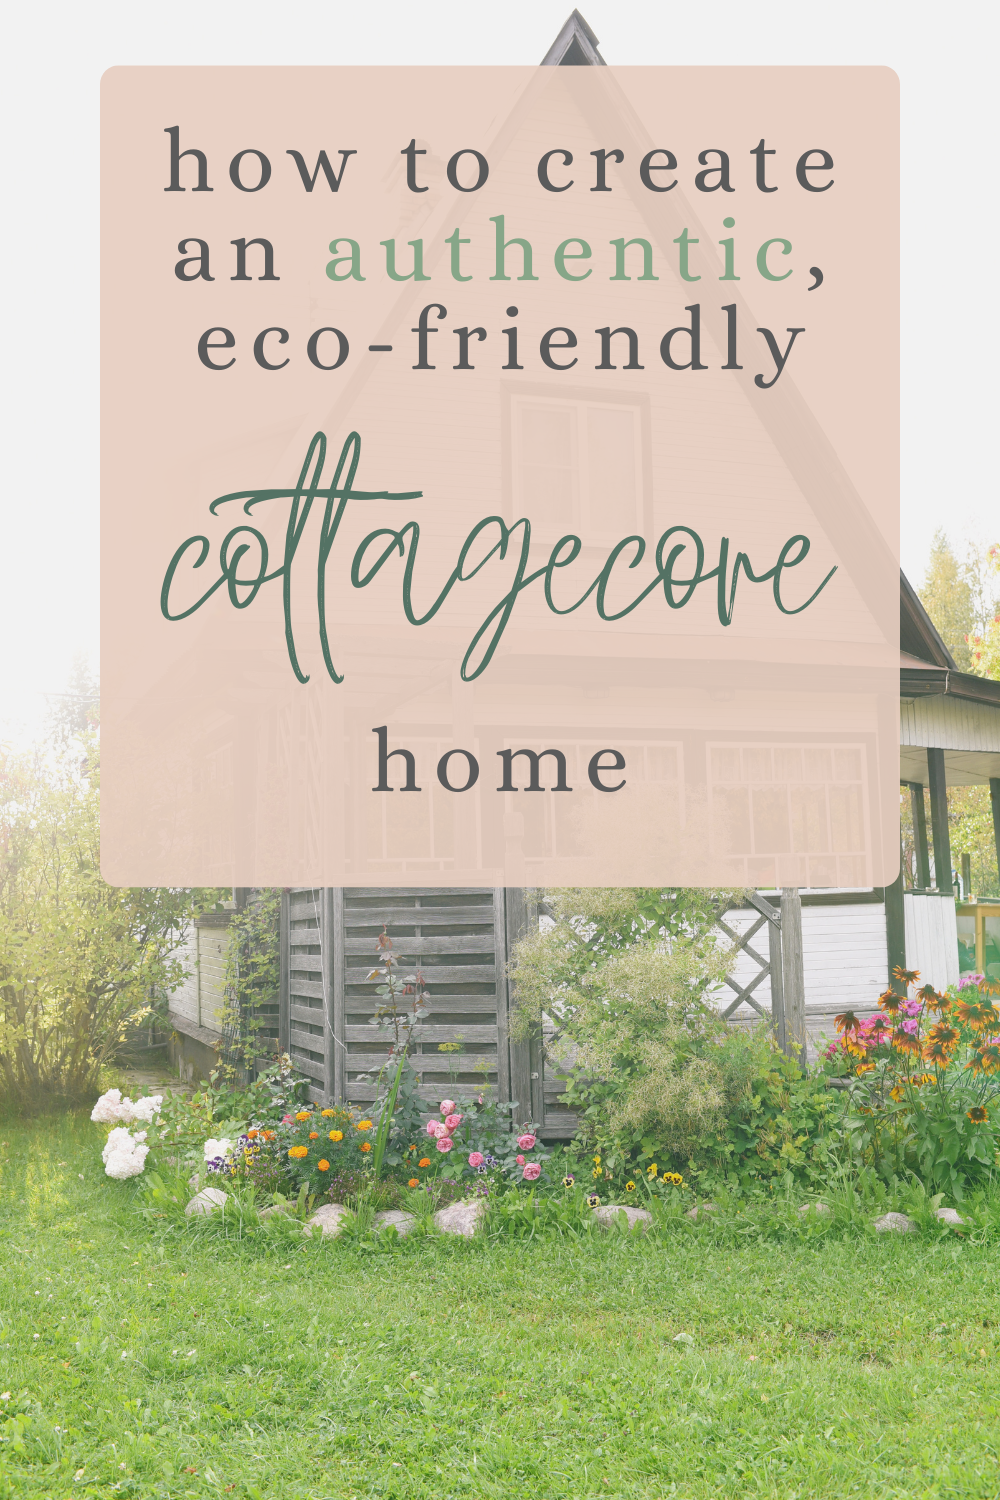 This is a pinterest pin, or a cover image displaying the blog post's title and theme, or cottagecore decor.